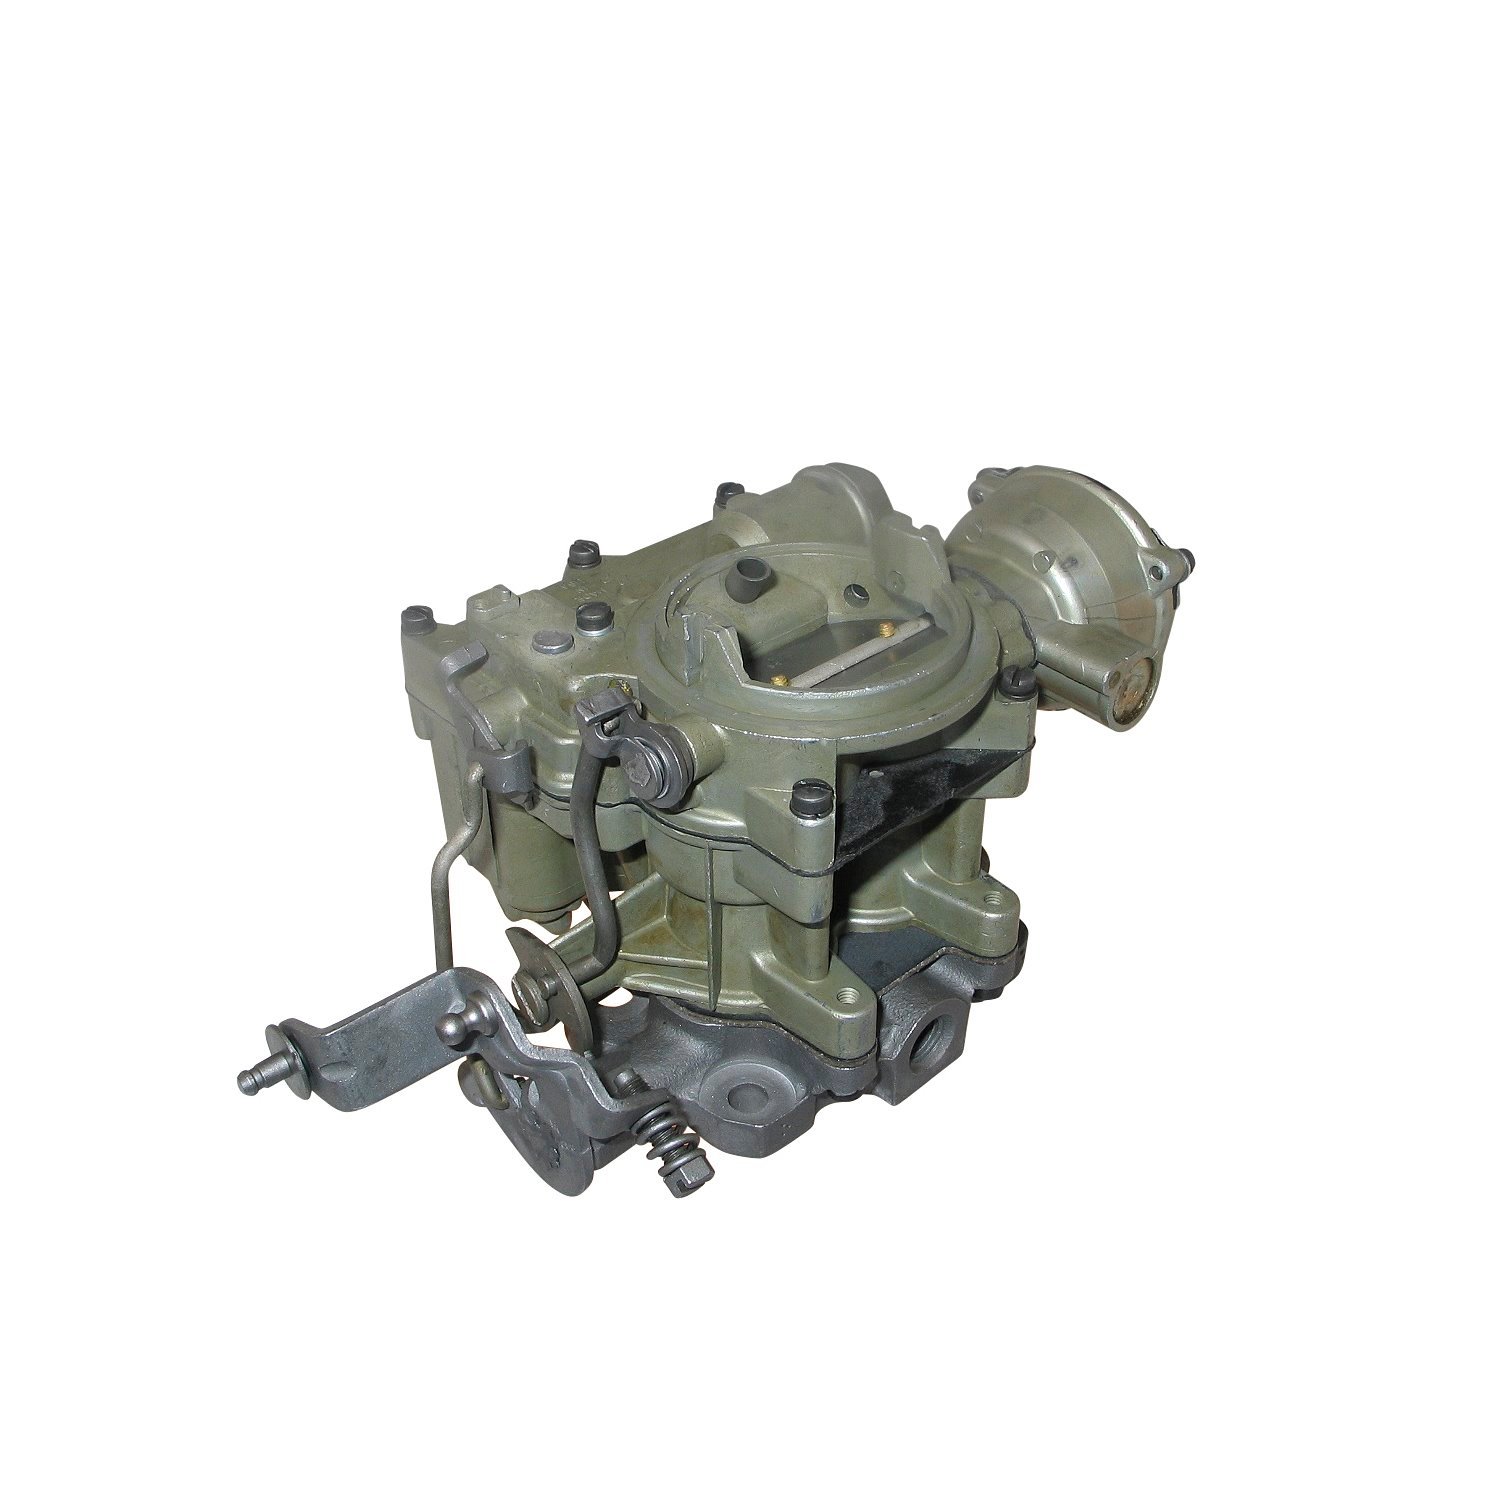 16-1632 Rochester Remanufactured Carburetor, 2G-Style